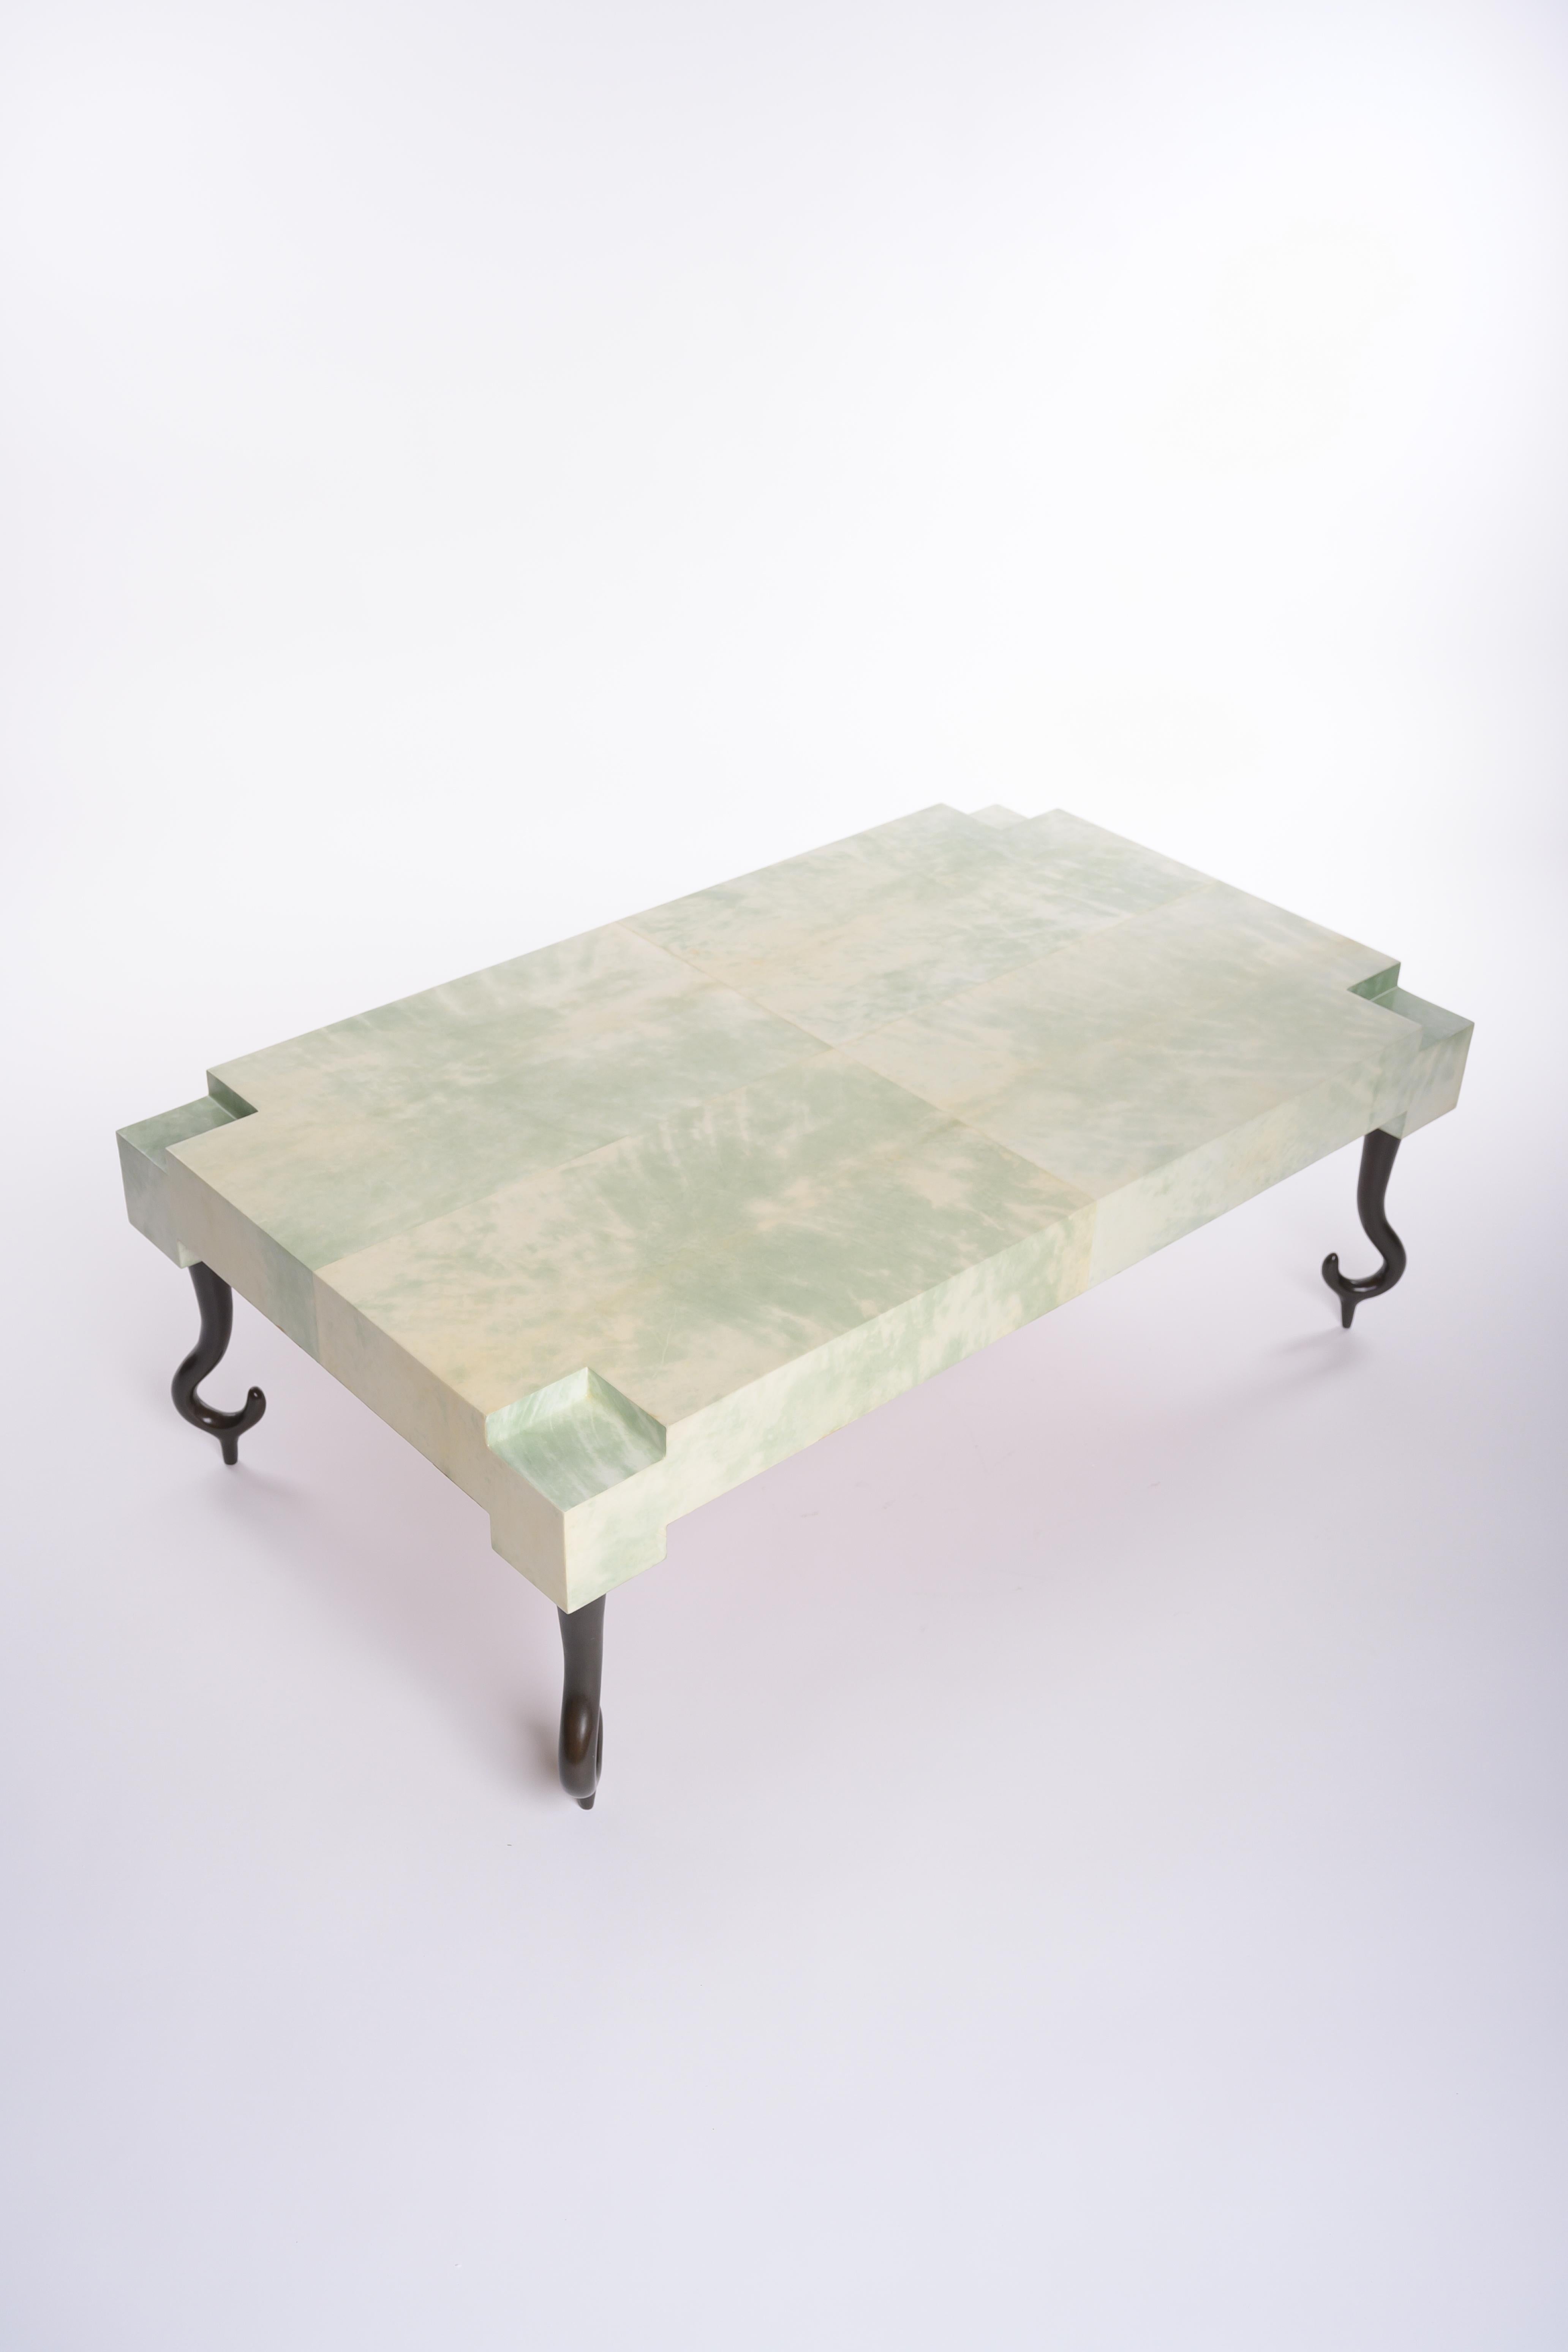 Faroh Coffee Table in Parchment and Cast Bronze by Elan Atelier

The distinctive Faroh coffee table features an elegant geometric top form wrapped in luxurious dyed parchment on cast bronze legs. Shown here in our Jade Parchment finish. Custom sizes